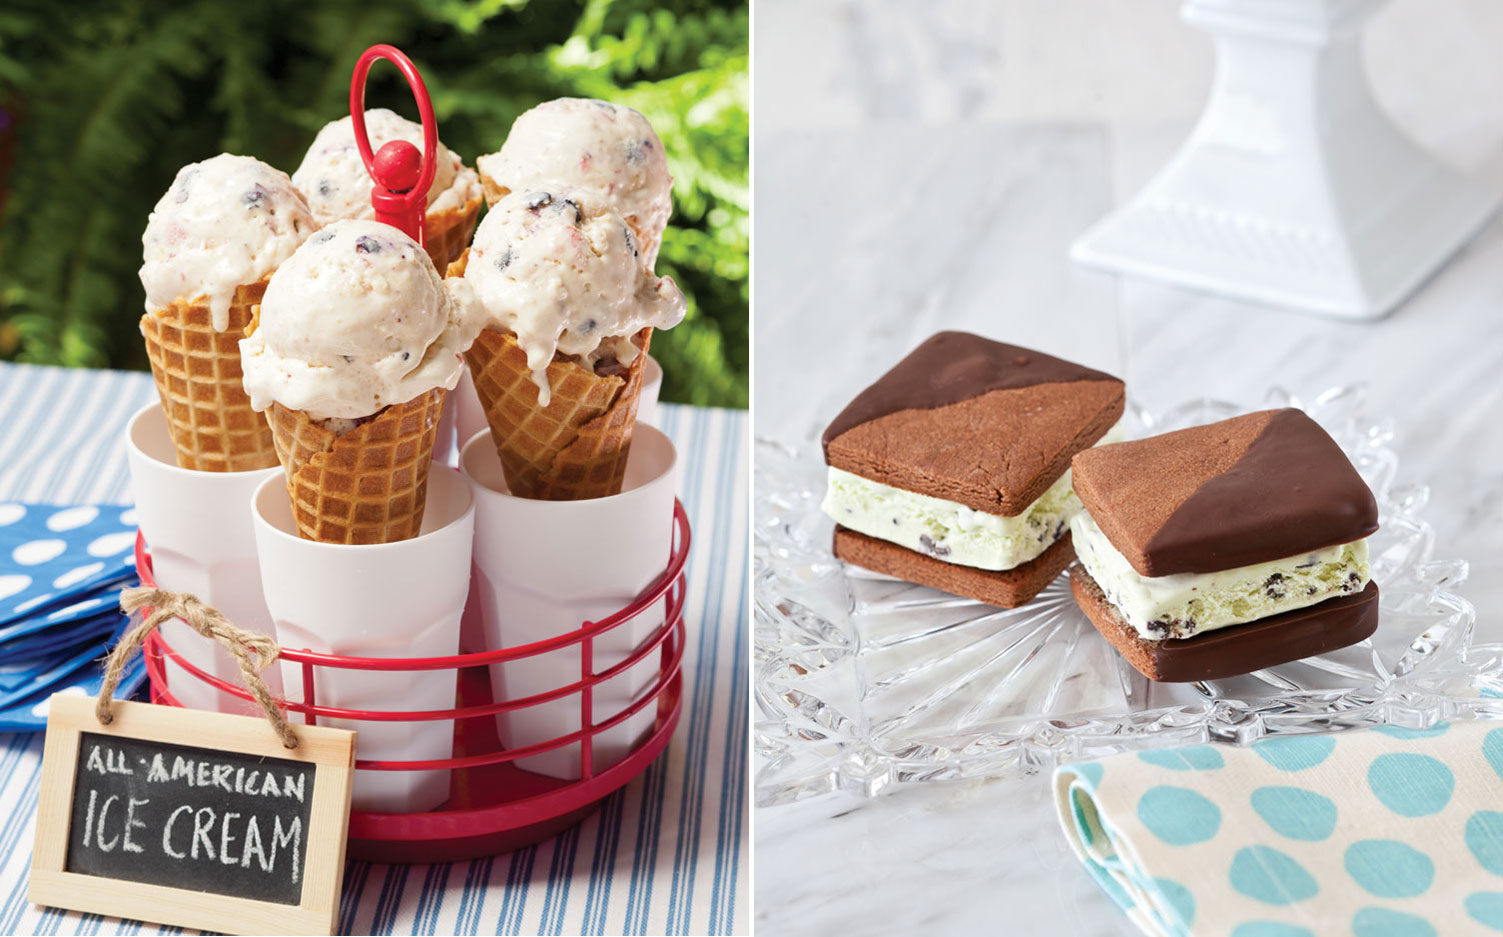 A photo of mint chocolate chip ice cream sandwiches and all-American ice cream cones